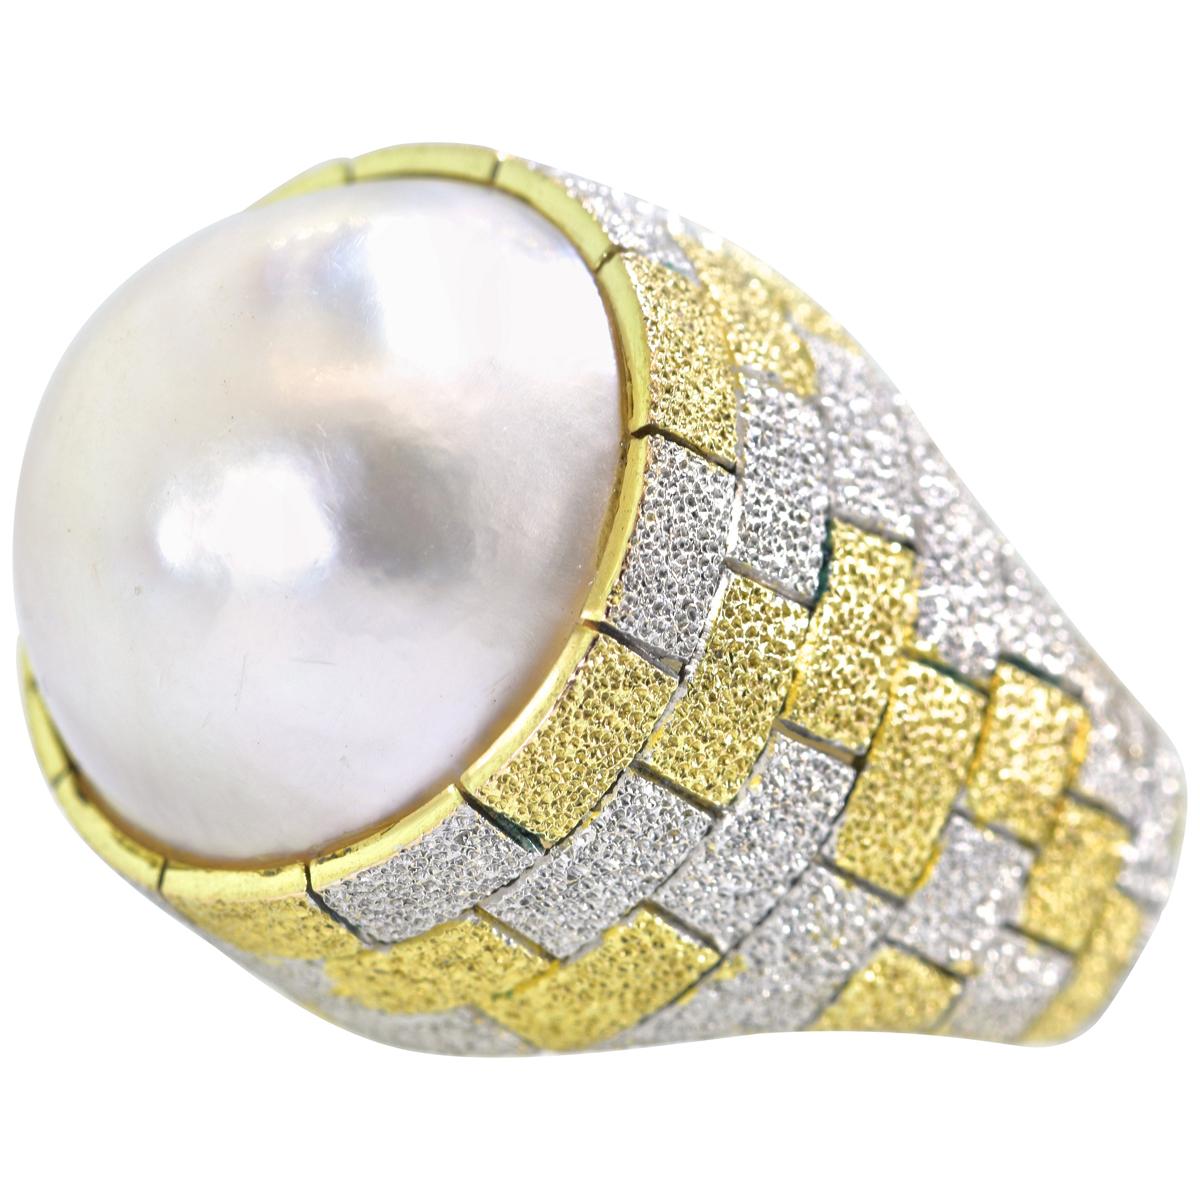 18 Karat Yellow and White Gold Holding a Large Cultured Mabe Pearl, circa 1965